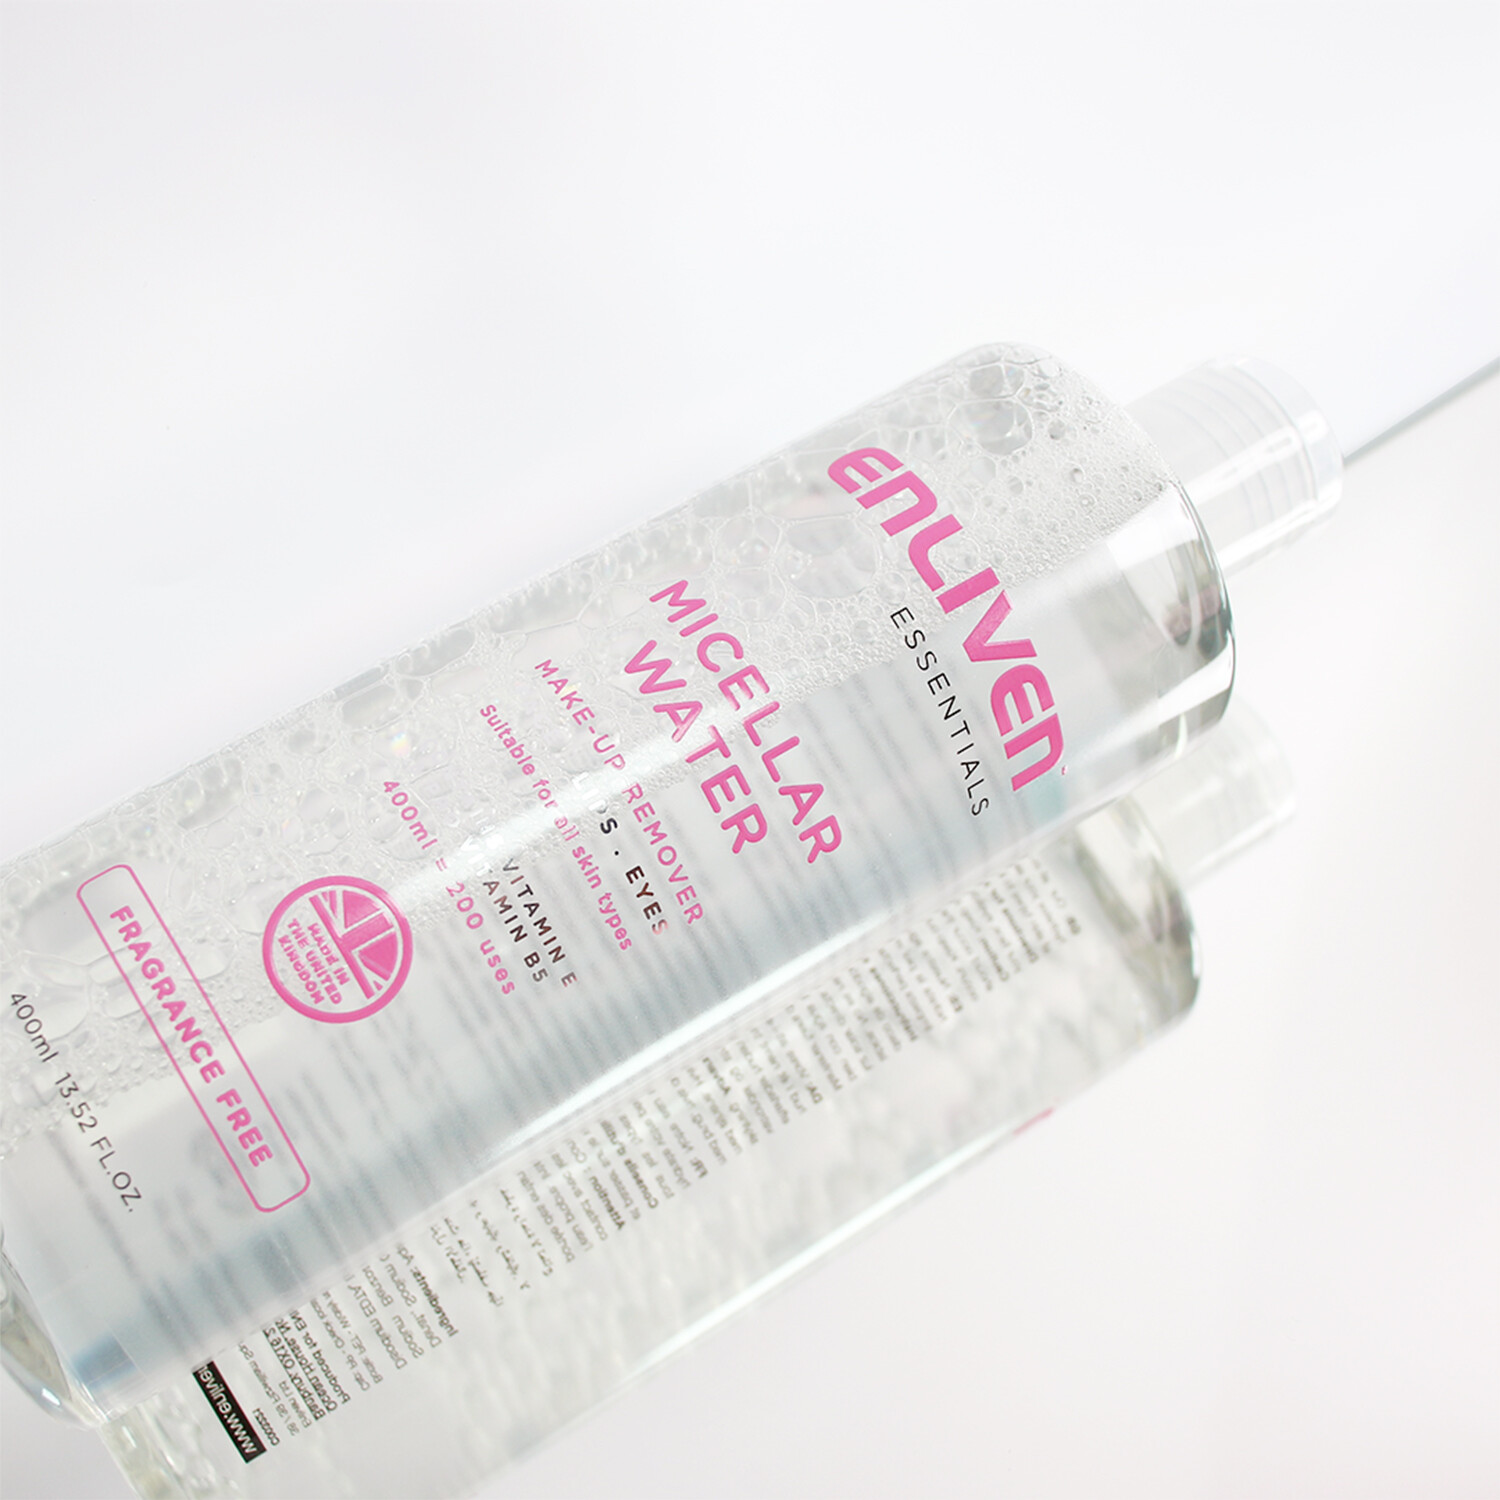 Enliven Micellar Water 400ml Image 5